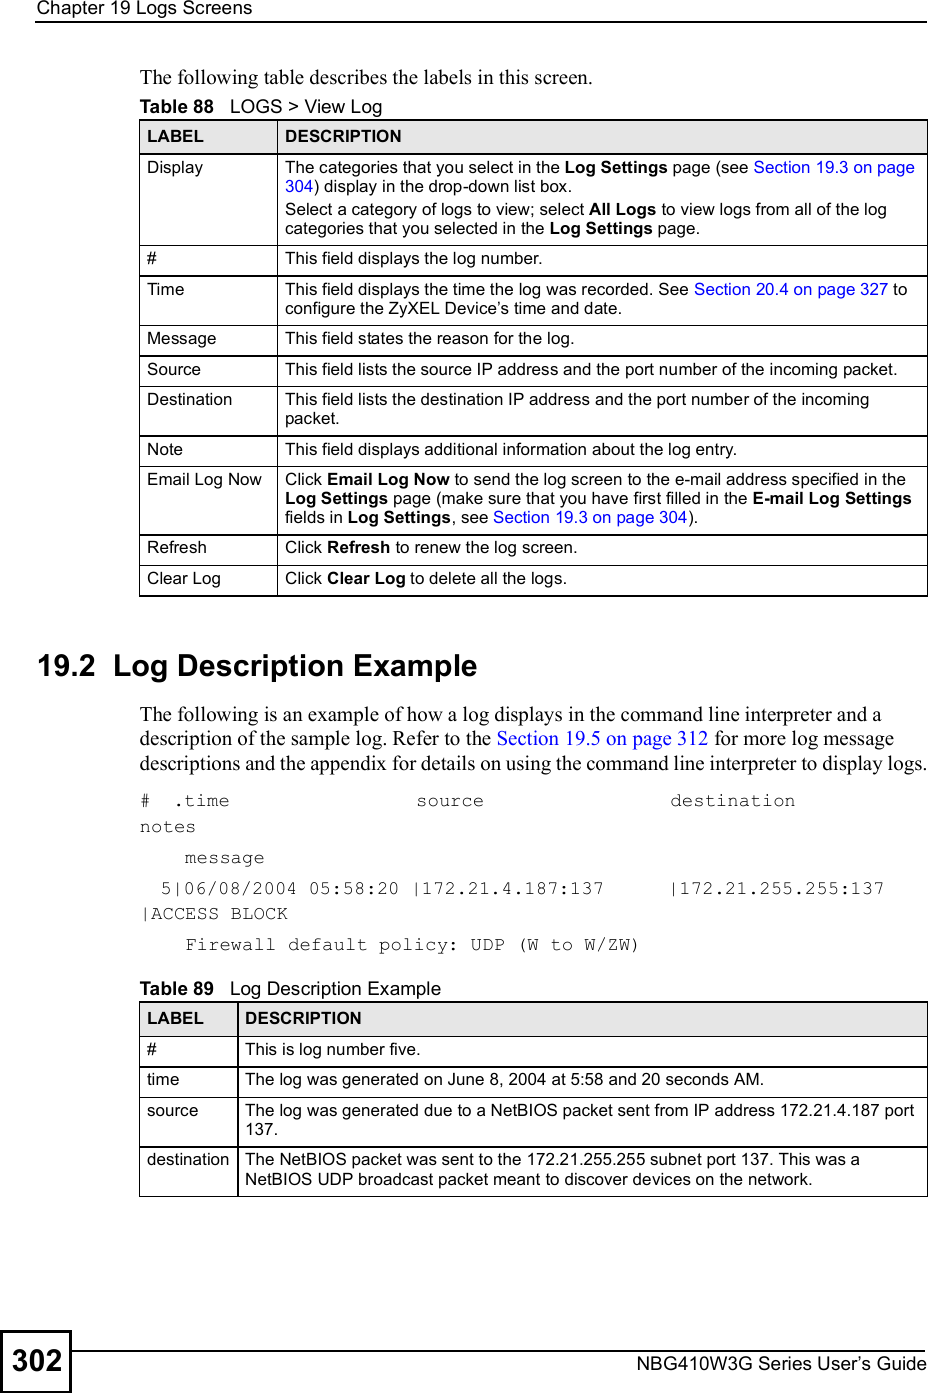 Chapter 19Logs ScreensNBG410W3G Series User s Guide302The following table describes the labels in this screen. 19.2  Log Description ExampleThe following is an example of how a log displays in the command line interpreter and a description of the sample log. Refer to the Section 19.5 on page 312 for more log message descriptions and the appendix for details on using the command line interpreter to display logs.#  .time                 source                 destination            notes    message  5|06/08/2004 05:58:20 |172.21.4.187:137      |172.21.255.255:137    |ACCESS BLOCK    Firewall default policy: UDP (W to W/ZW)Table 88   LOGS &gt; View LogLABEL DESCRIPTIONDisplay  The categories that you select in the Log Settings page (see Section 19.3 on page 304) display in the drop-down list box.Select a category of logs to view; select All Logs to view logs from all of the log categories that you selected in the Log Settings page. #This field displays the log number.Time  This field displays the time the log was recorded. See Section 20.4 on page 327 to configure the ZyXEL Device s time and date.Message This field states the reason for the log.Source This field lists the source IP address and the port number of the incoming packet.Destination  This field lists the destination IP address and the port number of the incoming packet.Note This field displays additional information about the log entry. Email Log Now  Click Email Log Now to send the log screen to the e-mail address specified in the Log Settings page (make sure that you have first filled in the E-mail Log Settings fields in Log Settings, see Section 19.3 on page 304).Refresh Click Refresh to renew the log screen. Clear Log  Click Clear Log to delete all the logs. Table 89   Log Description ExampleLABEL DESCRIPTION#This is log number five.time The log was generated on June 8, 2004 at 5:58 and 20 seconds AM. source The log was generated due to a NetBIOS packet sent from IP address 172.21.4.187 port 137. destination The NetBIOS packet was sent to the 172.21.255.255 subnet port 137. This was a NetBIOS UDP broadcast packet meant to discover devices on the network.